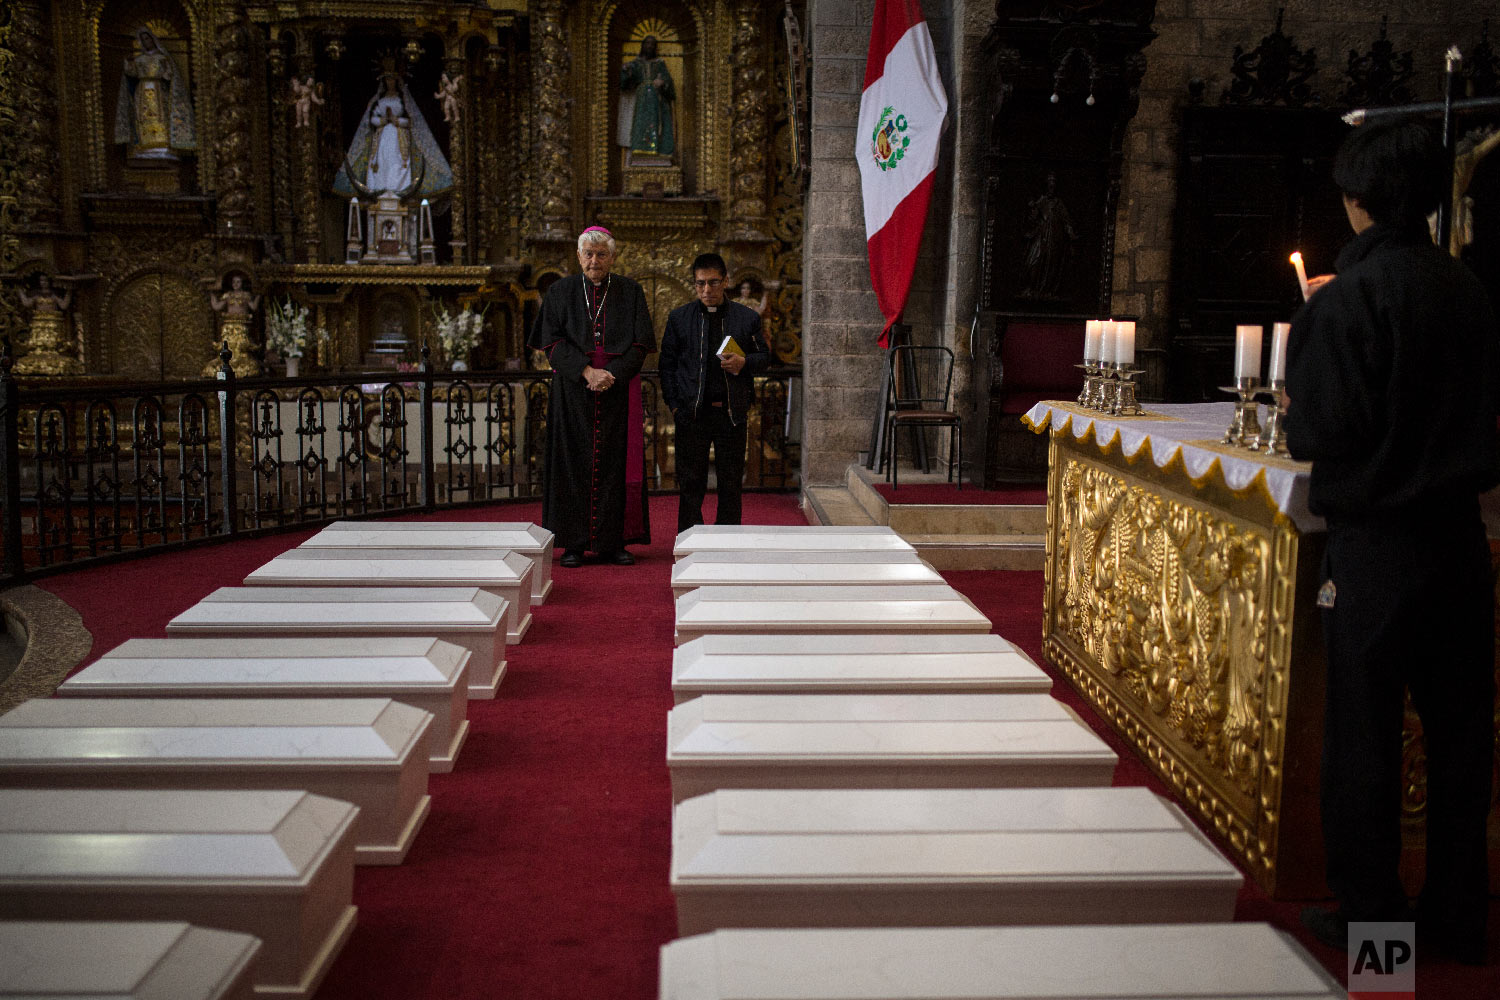  In this Aug. 14, 2018 photo, Ayacucho's Bishop Salvador Jose Miguel Pineiro, left, stands with an assistant behind the coffins of villagers who were killed by Shining Path guerrillas and the Peruvian army in the 1980s, inside the Cathedral in Ayacuc